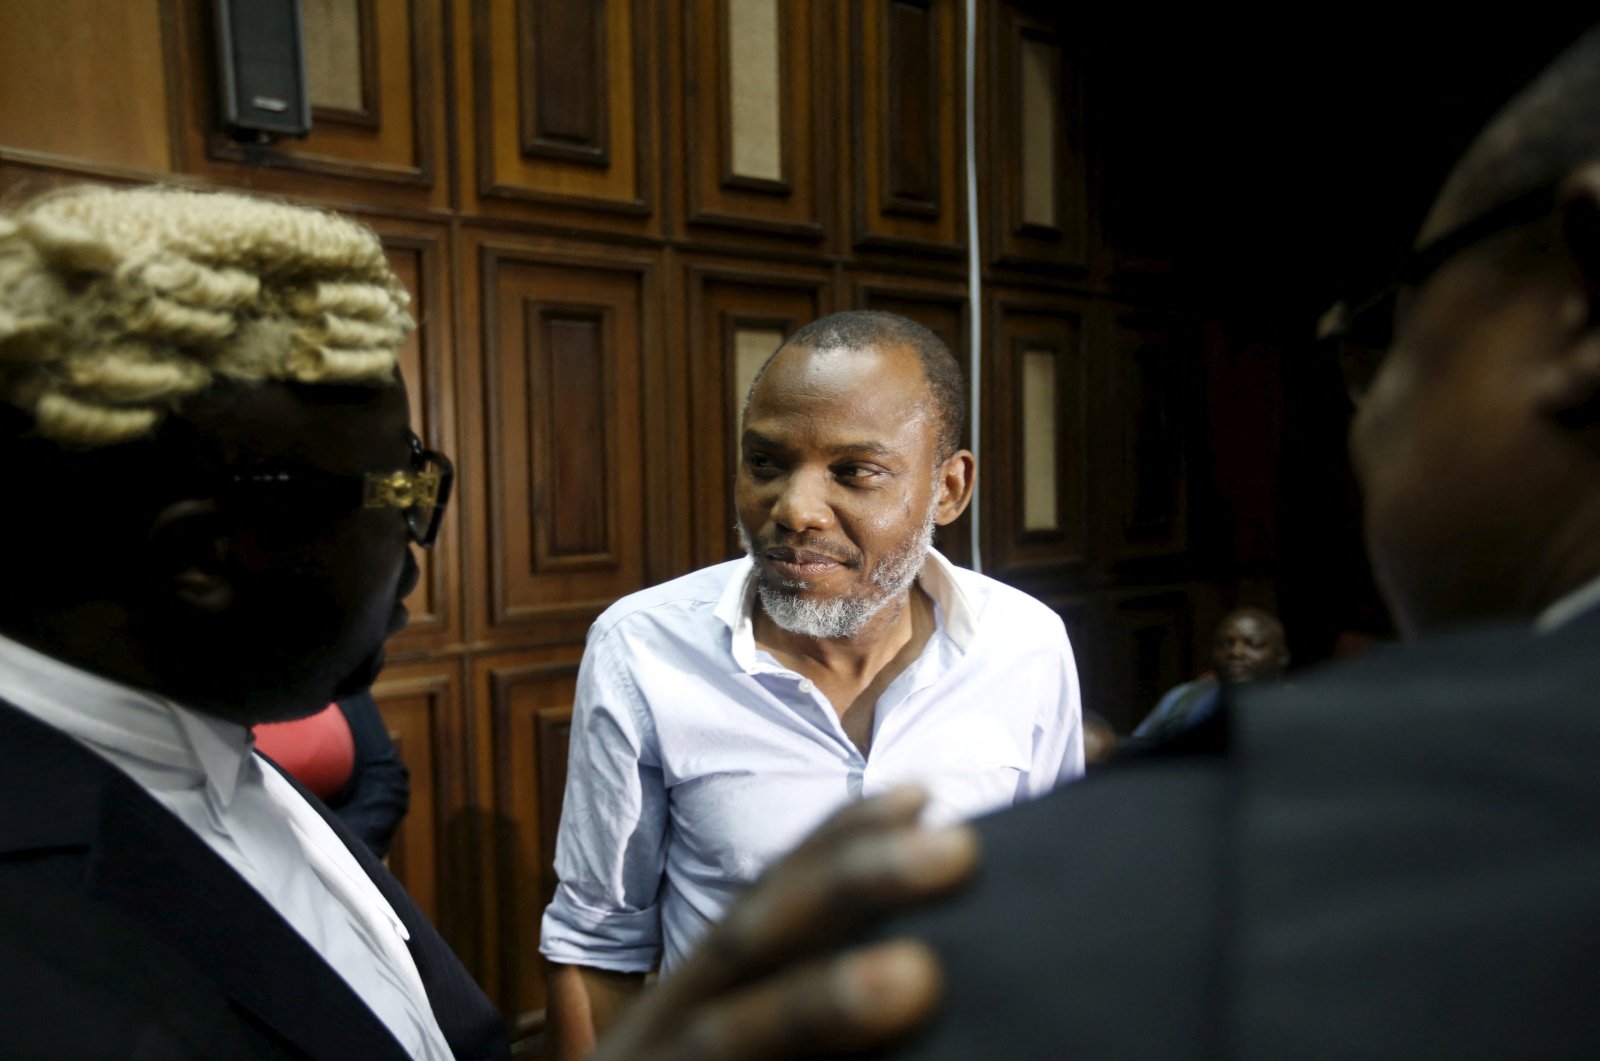 Indigenous People of Biafra (IPOB) leader Nnamdi Kanu is seen at the Federal high court Abuja, Nigeria, Jan. 20, 2016. (Reuters Photo)